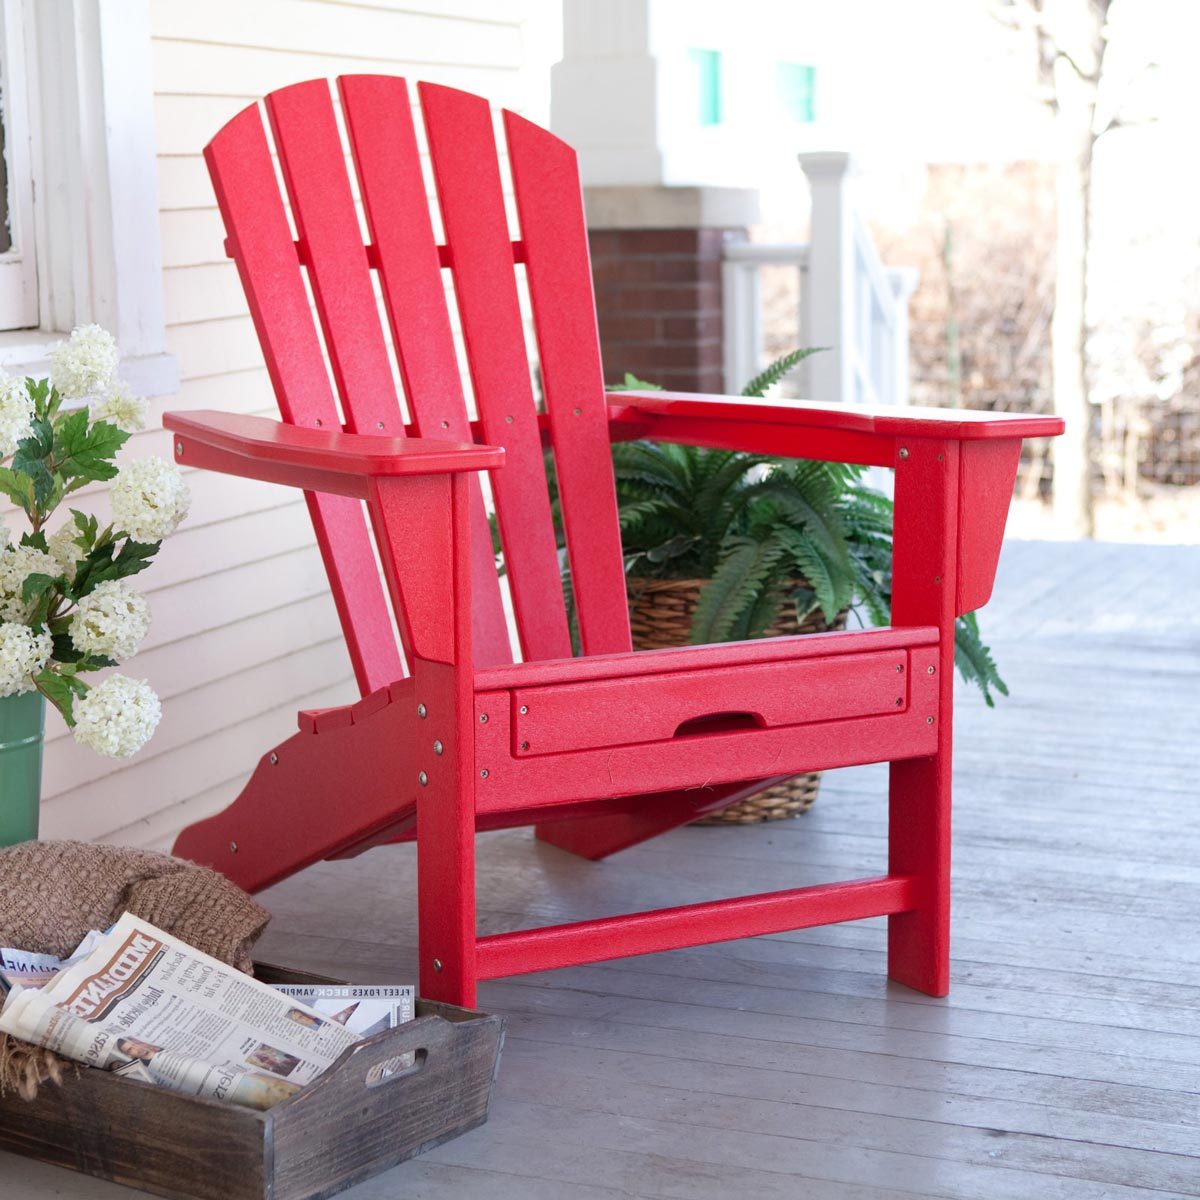 15 Adirondack Chairs You Have to See to Believe